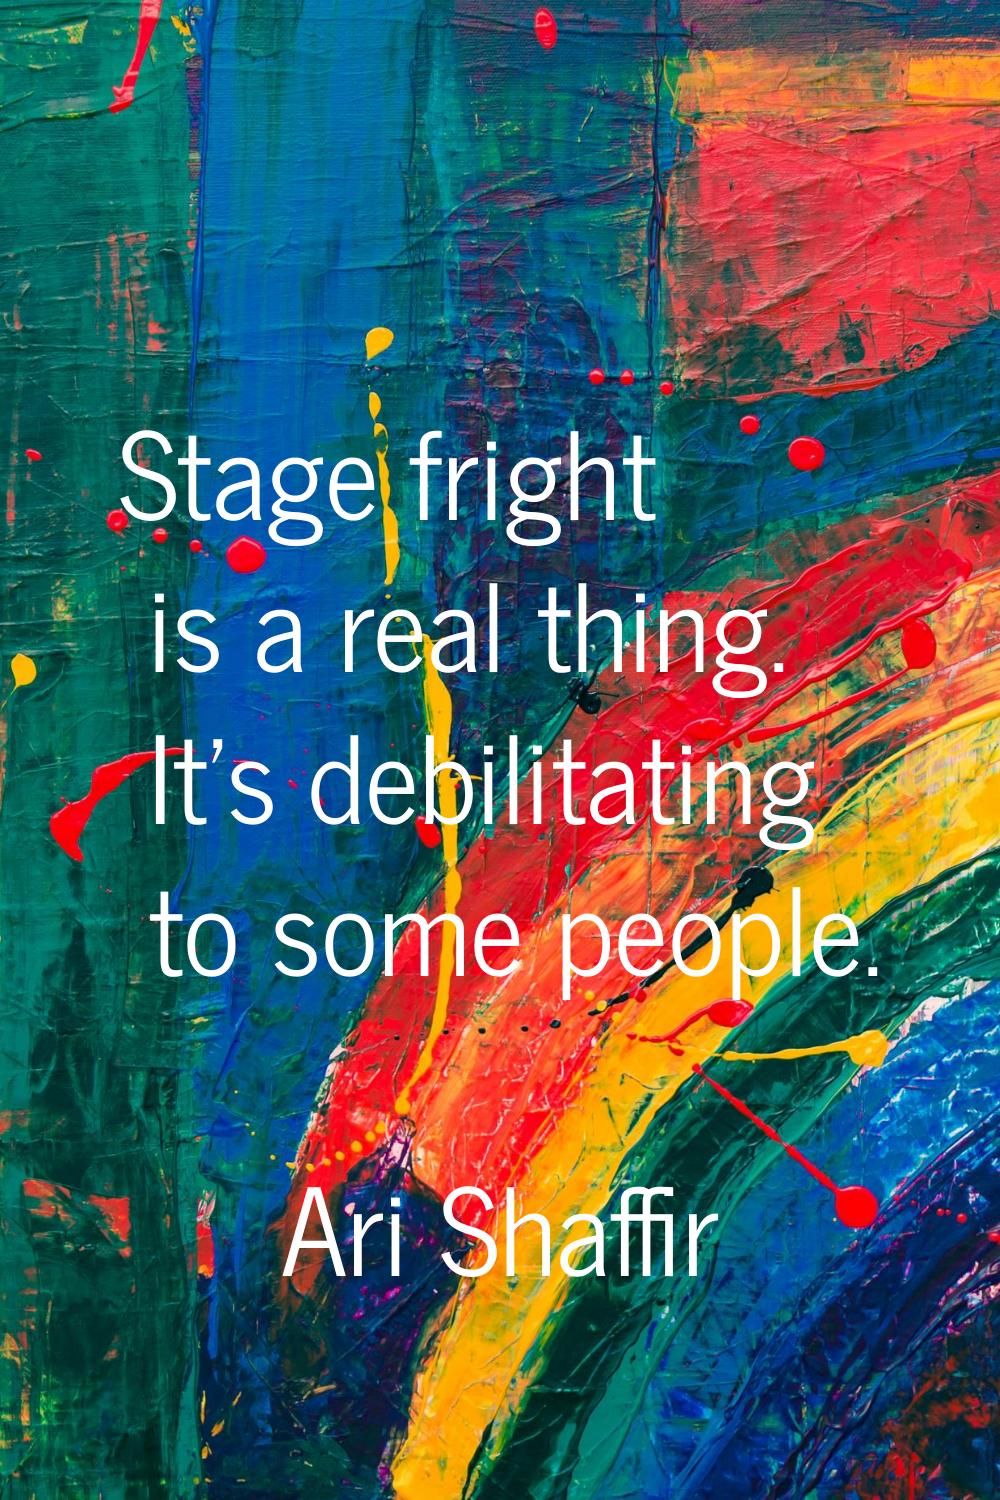 Stage fright is a real thing. It's debilitating to some people.